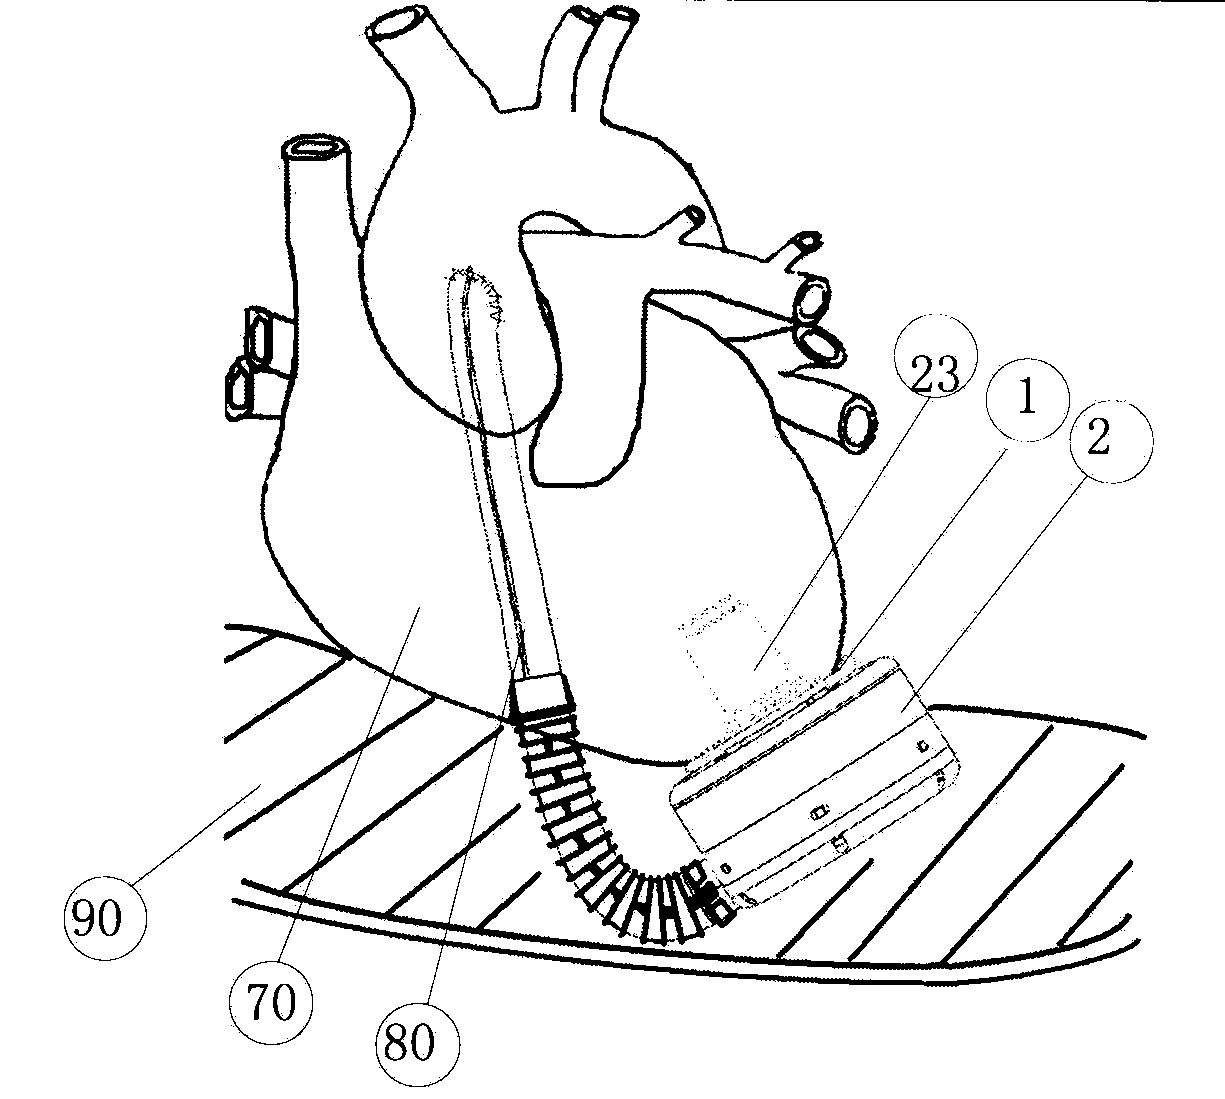 Left ventricle auxiliary blood pump